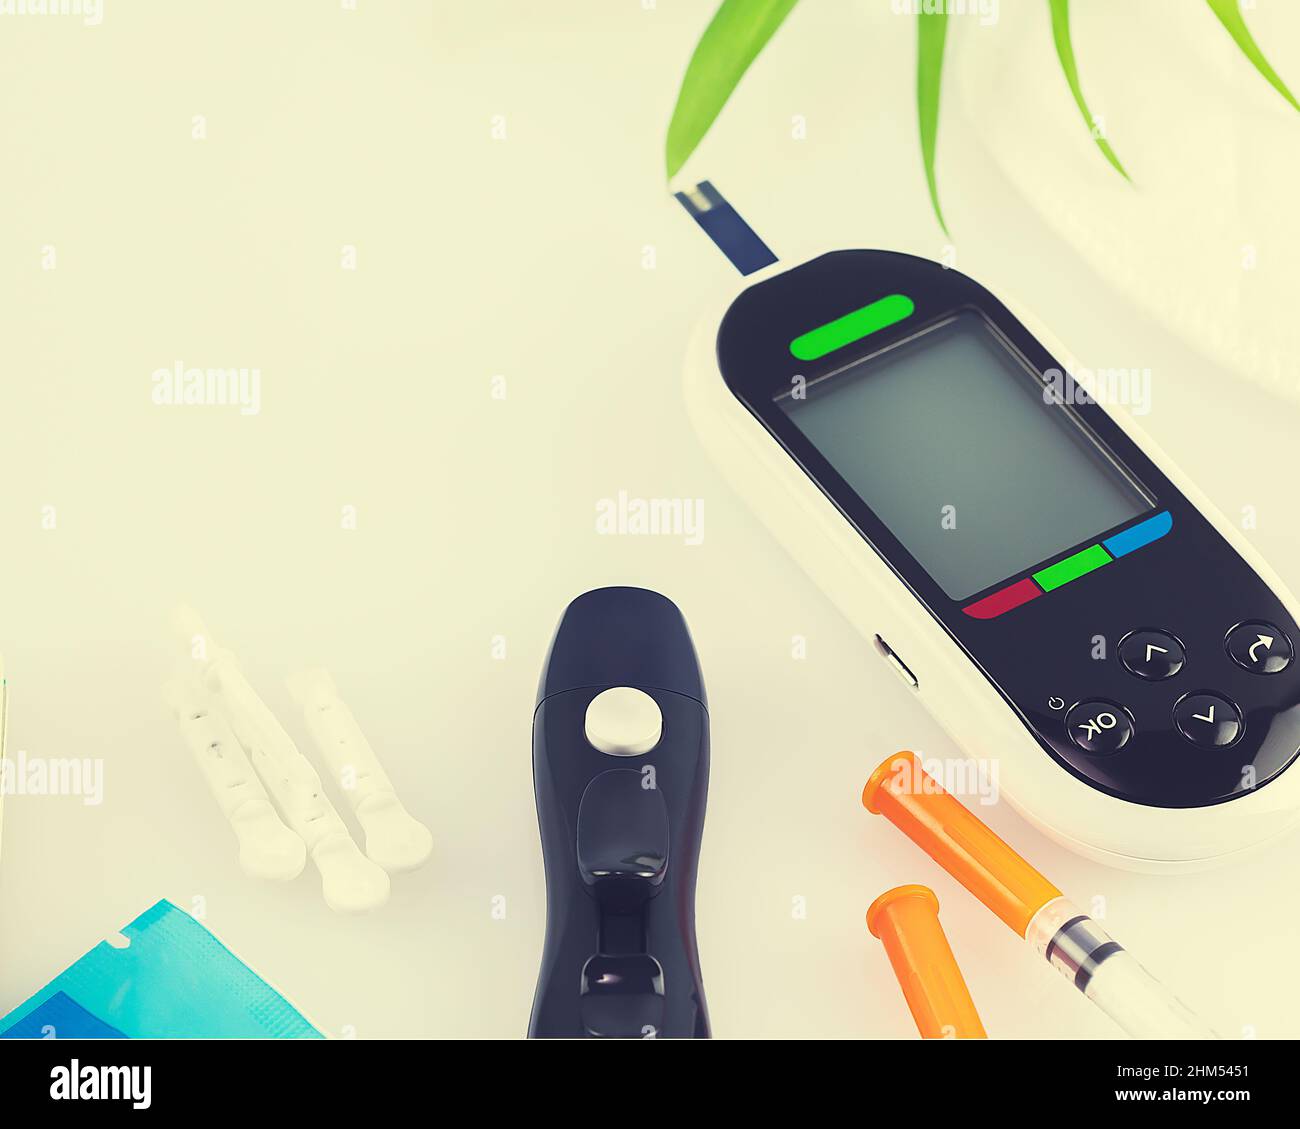 Diabetes control. Diabetic disease concept with Glucose meter, test strips for determining blood sugar levels, lancets and insulin syringes on a white Stock Photo